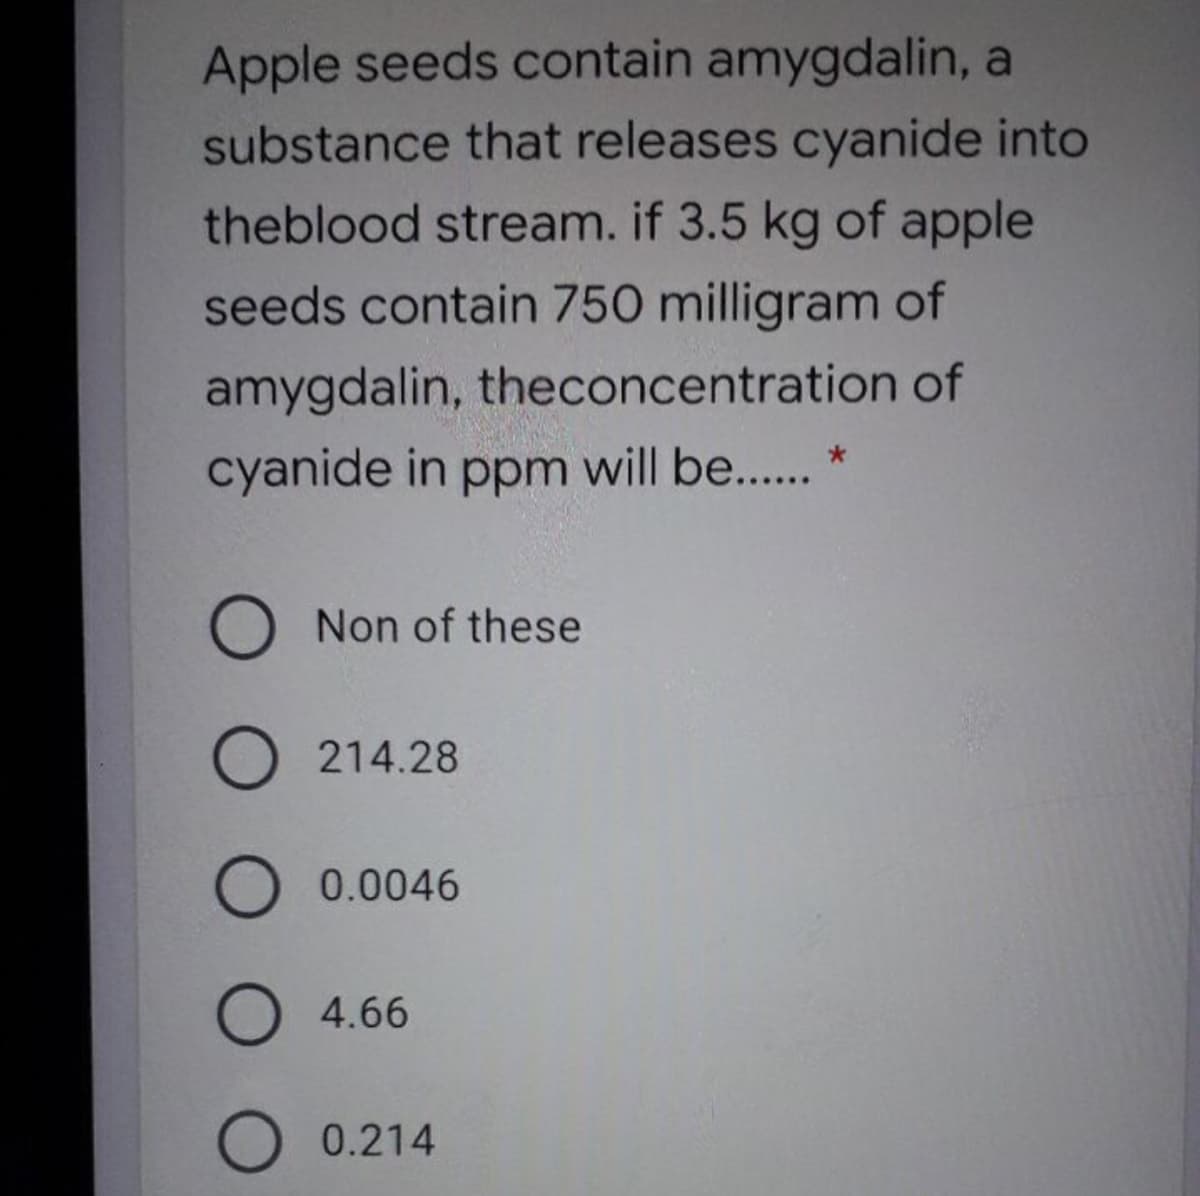 Apple seeds contain amygdalin, a
substance that releases cyanide into
theblood stream. if 3.5 kg of apple
seeds contain 750 milligram of
amygdalin, theconcentration of
cyanide in ppm will be.. *
Non of these
O 214.28
0.0046
O 4.66
O 0.214
